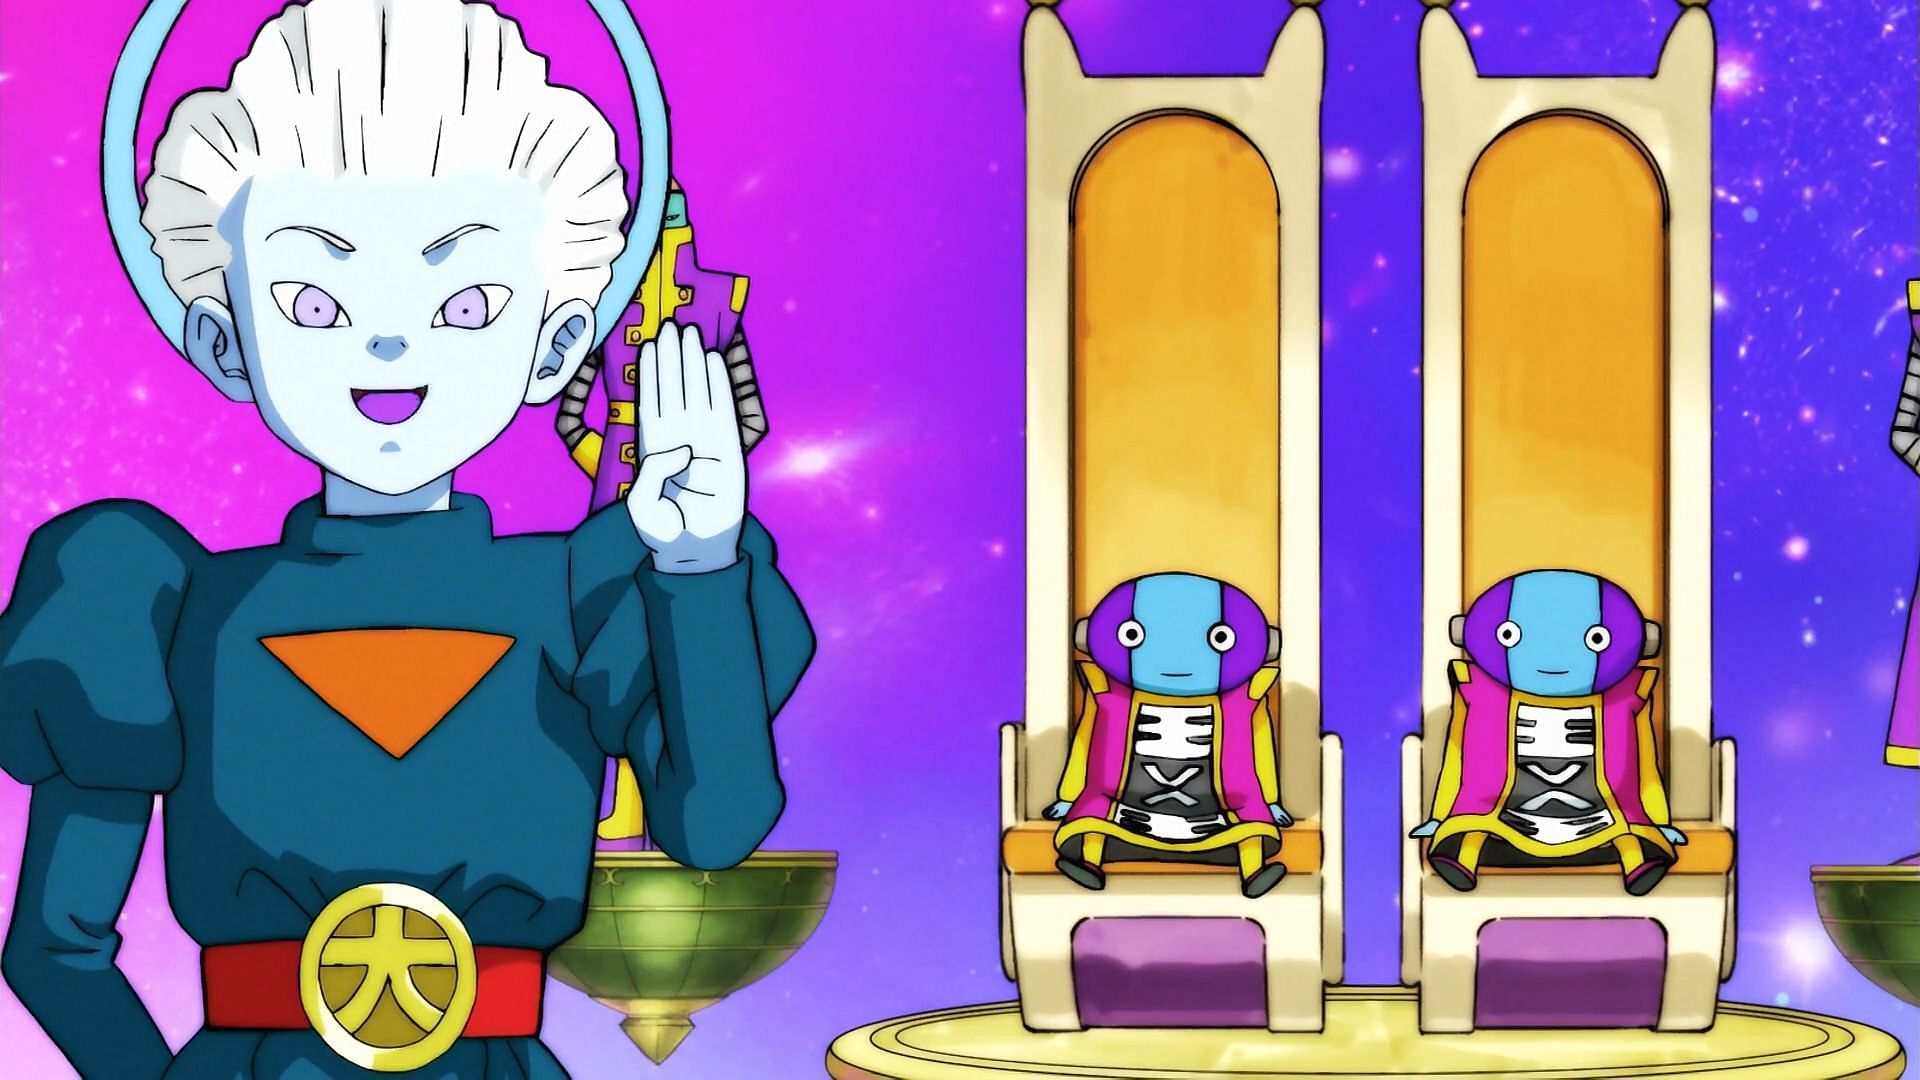 The Grand Priest standing in front of both Zenos and their attendants (Image via Toei Animation)